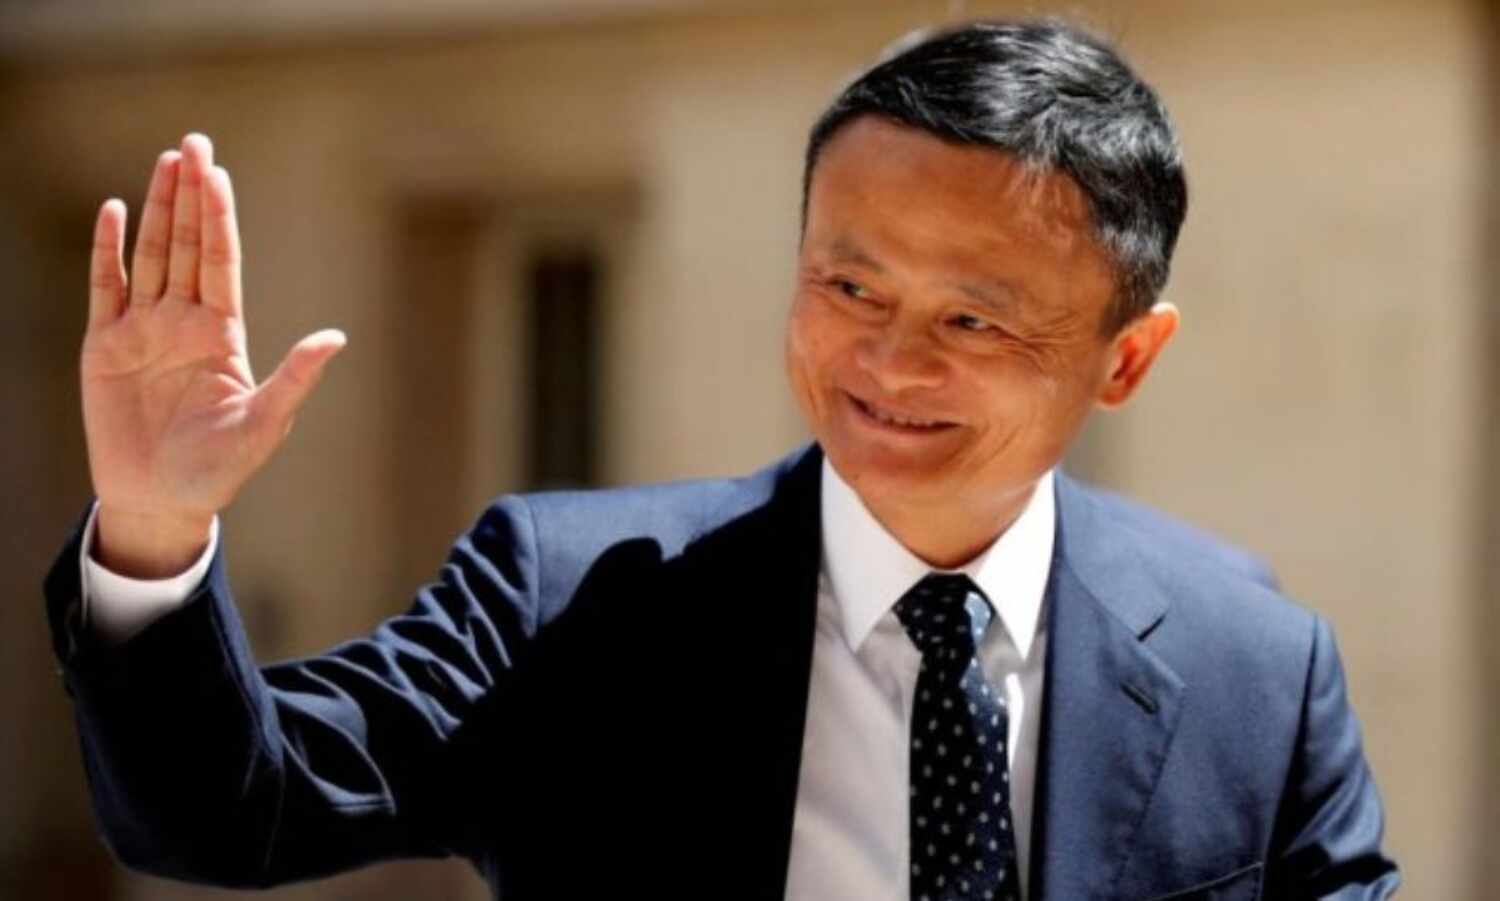 Alibaba founder Jack Ma seen in China after long absence